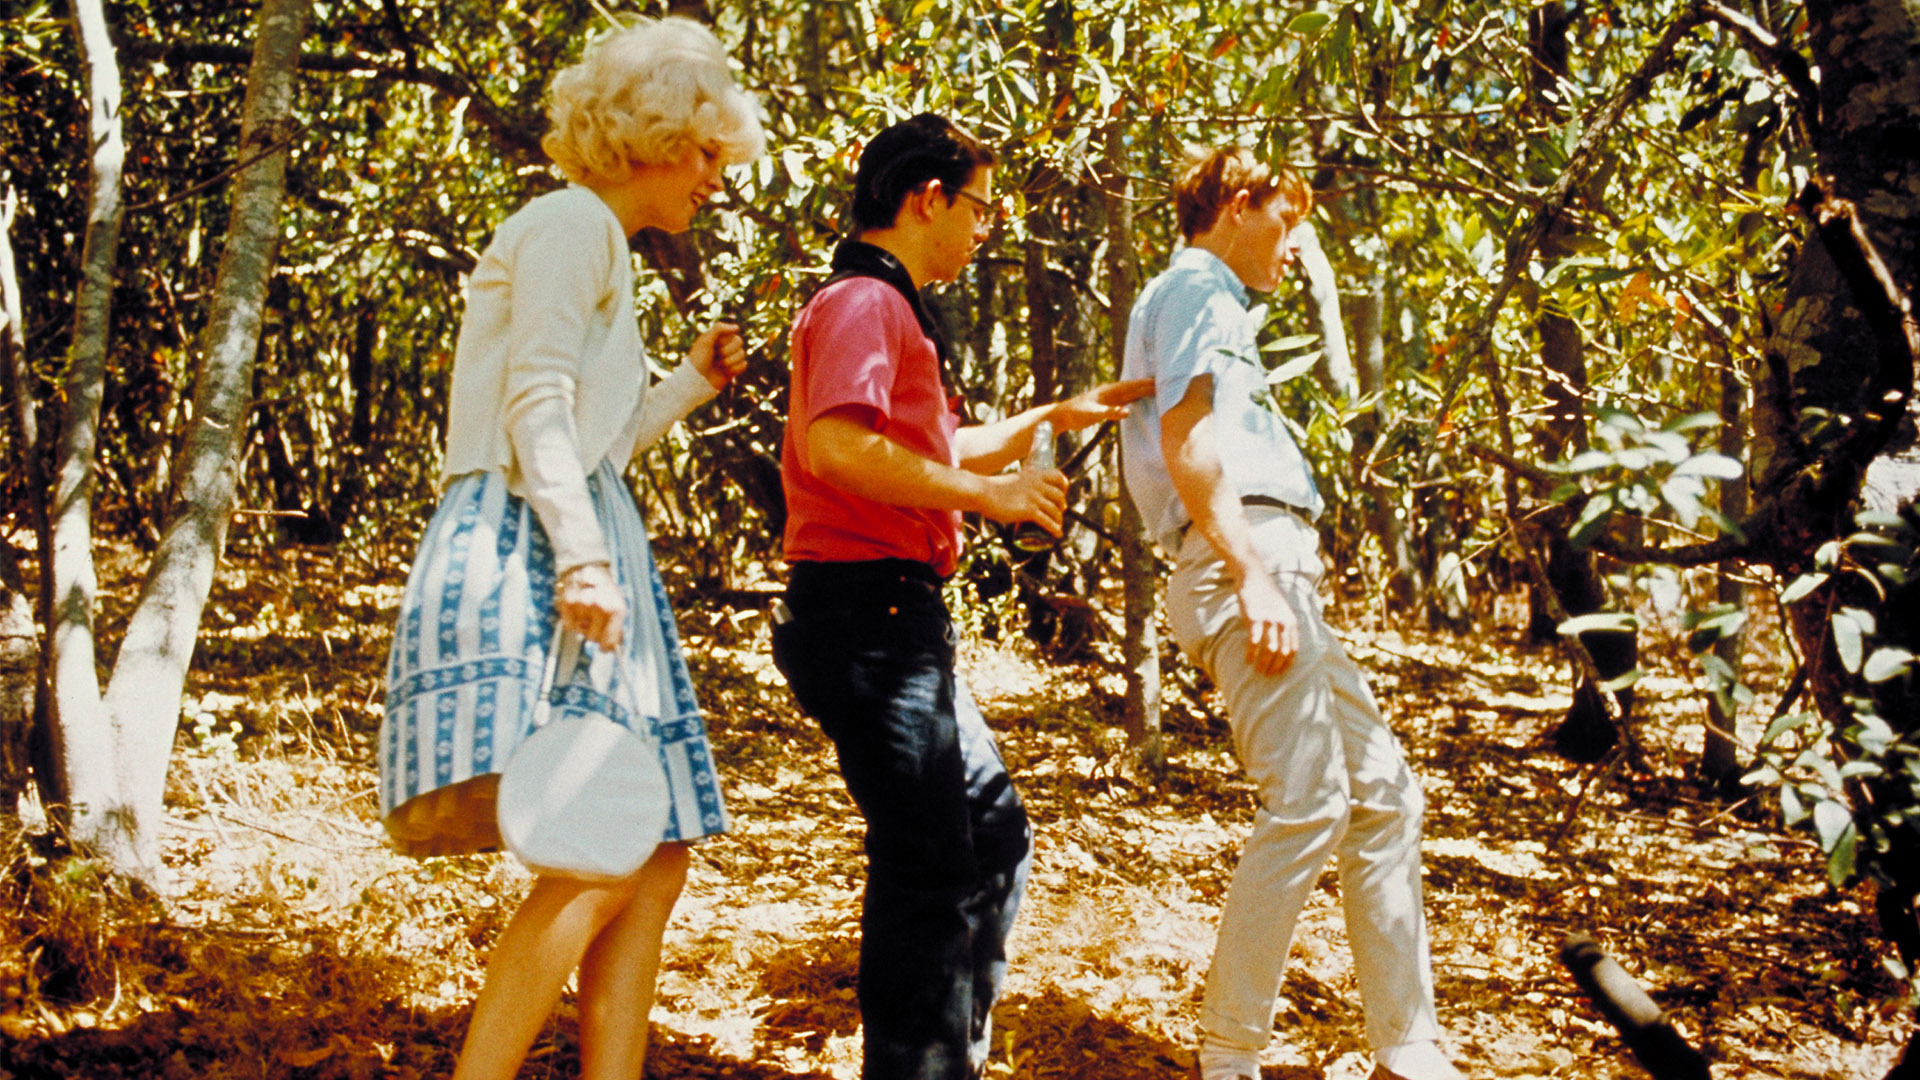 Debbie, Terry, and Steve in the woods in American Graffiti.